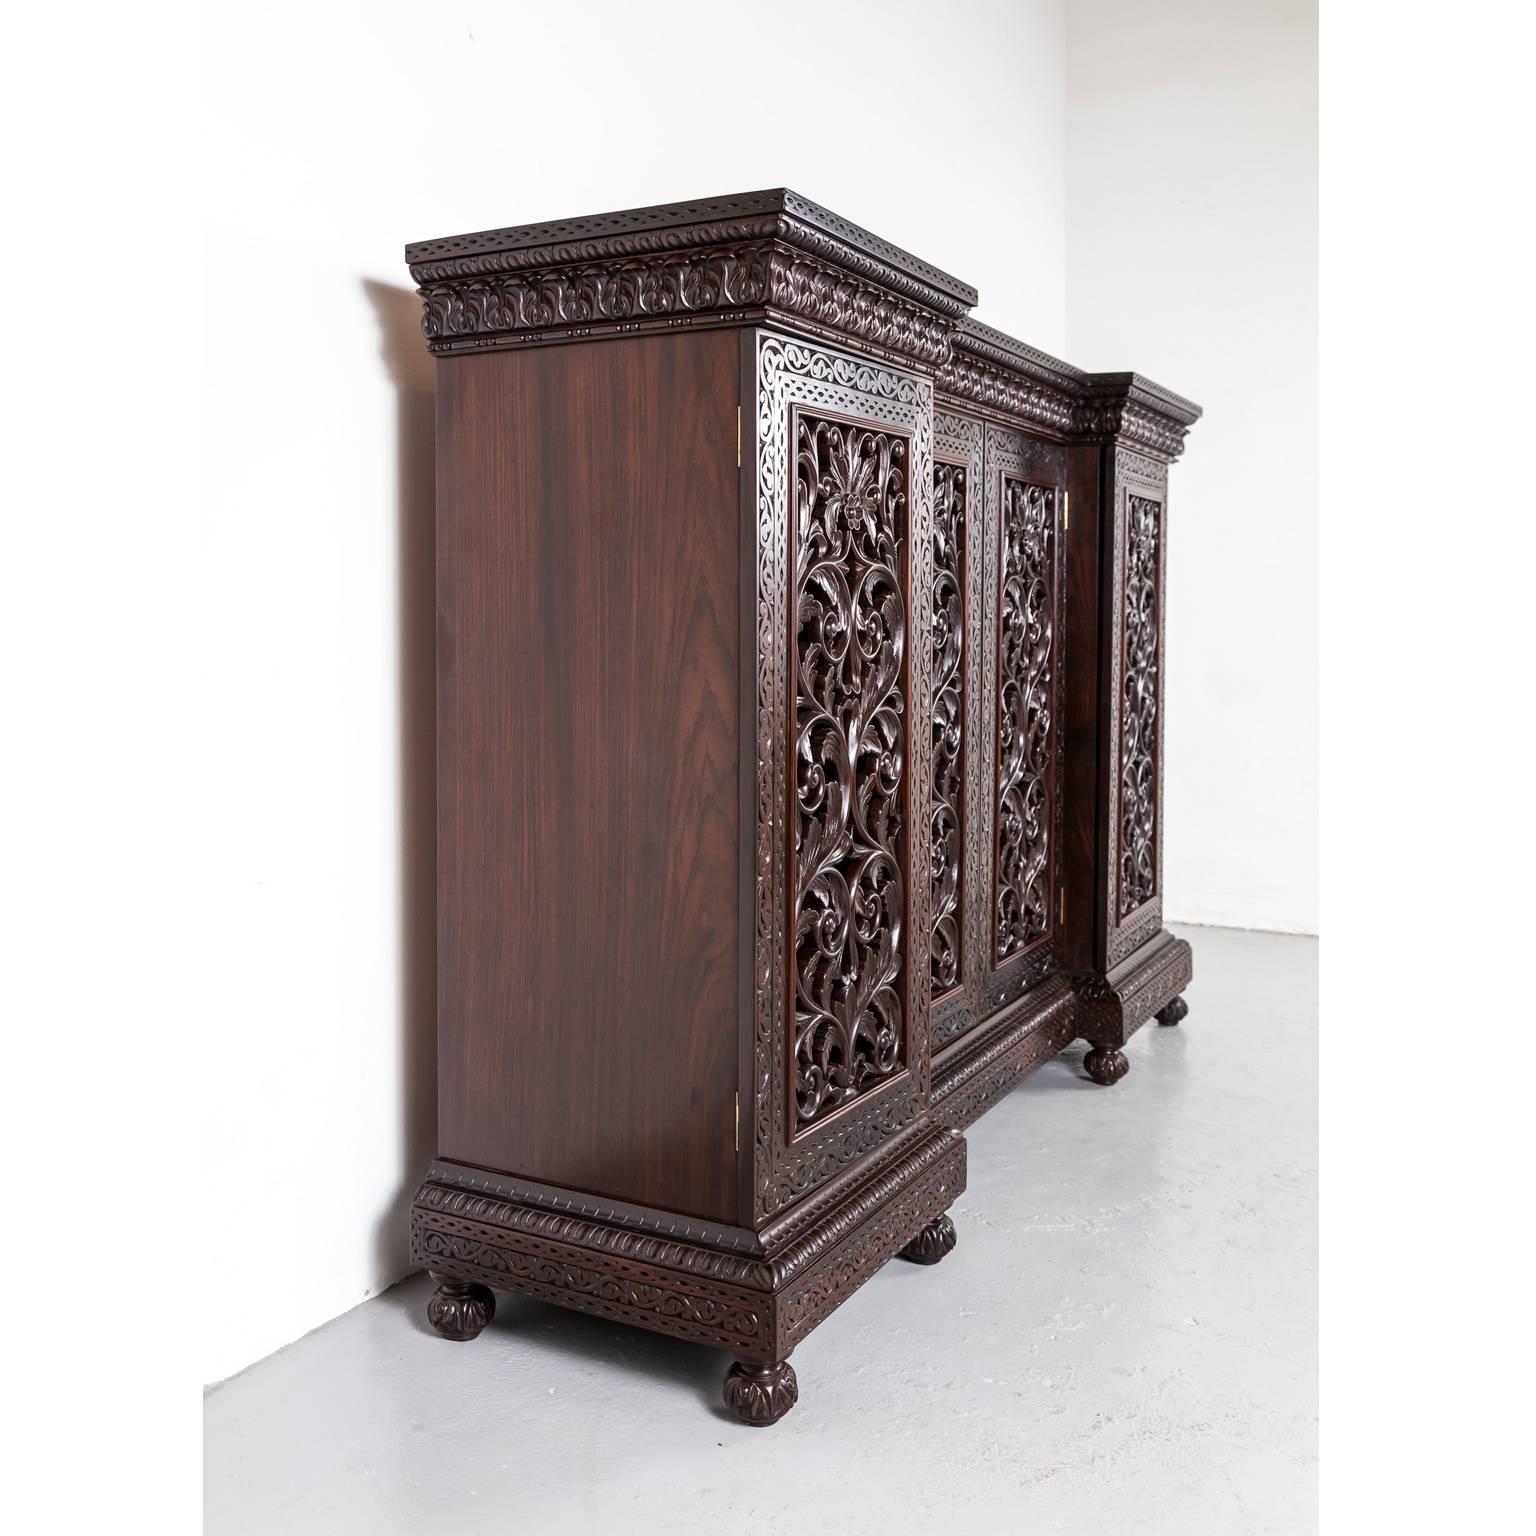 19th Century Anglo-Indian or British Colonial Rosewood Breakfront Cabinet